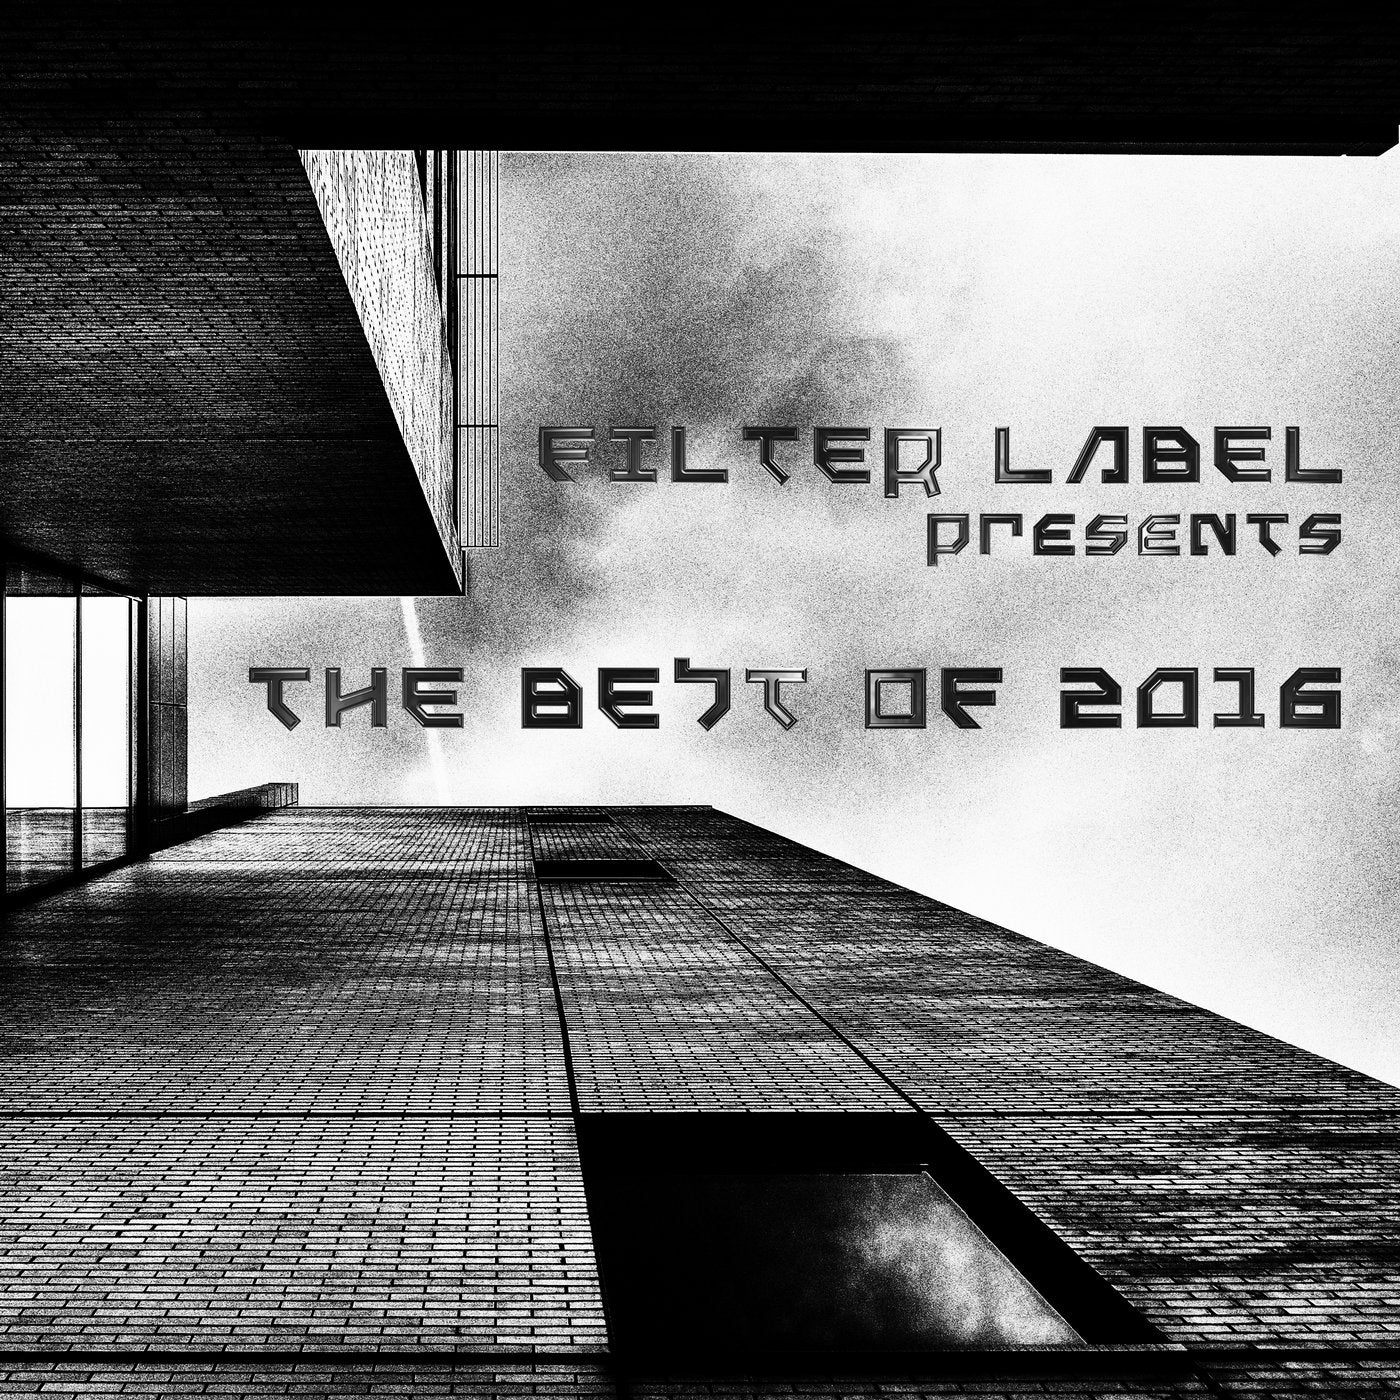 Filter Label Presents the Best of 2016